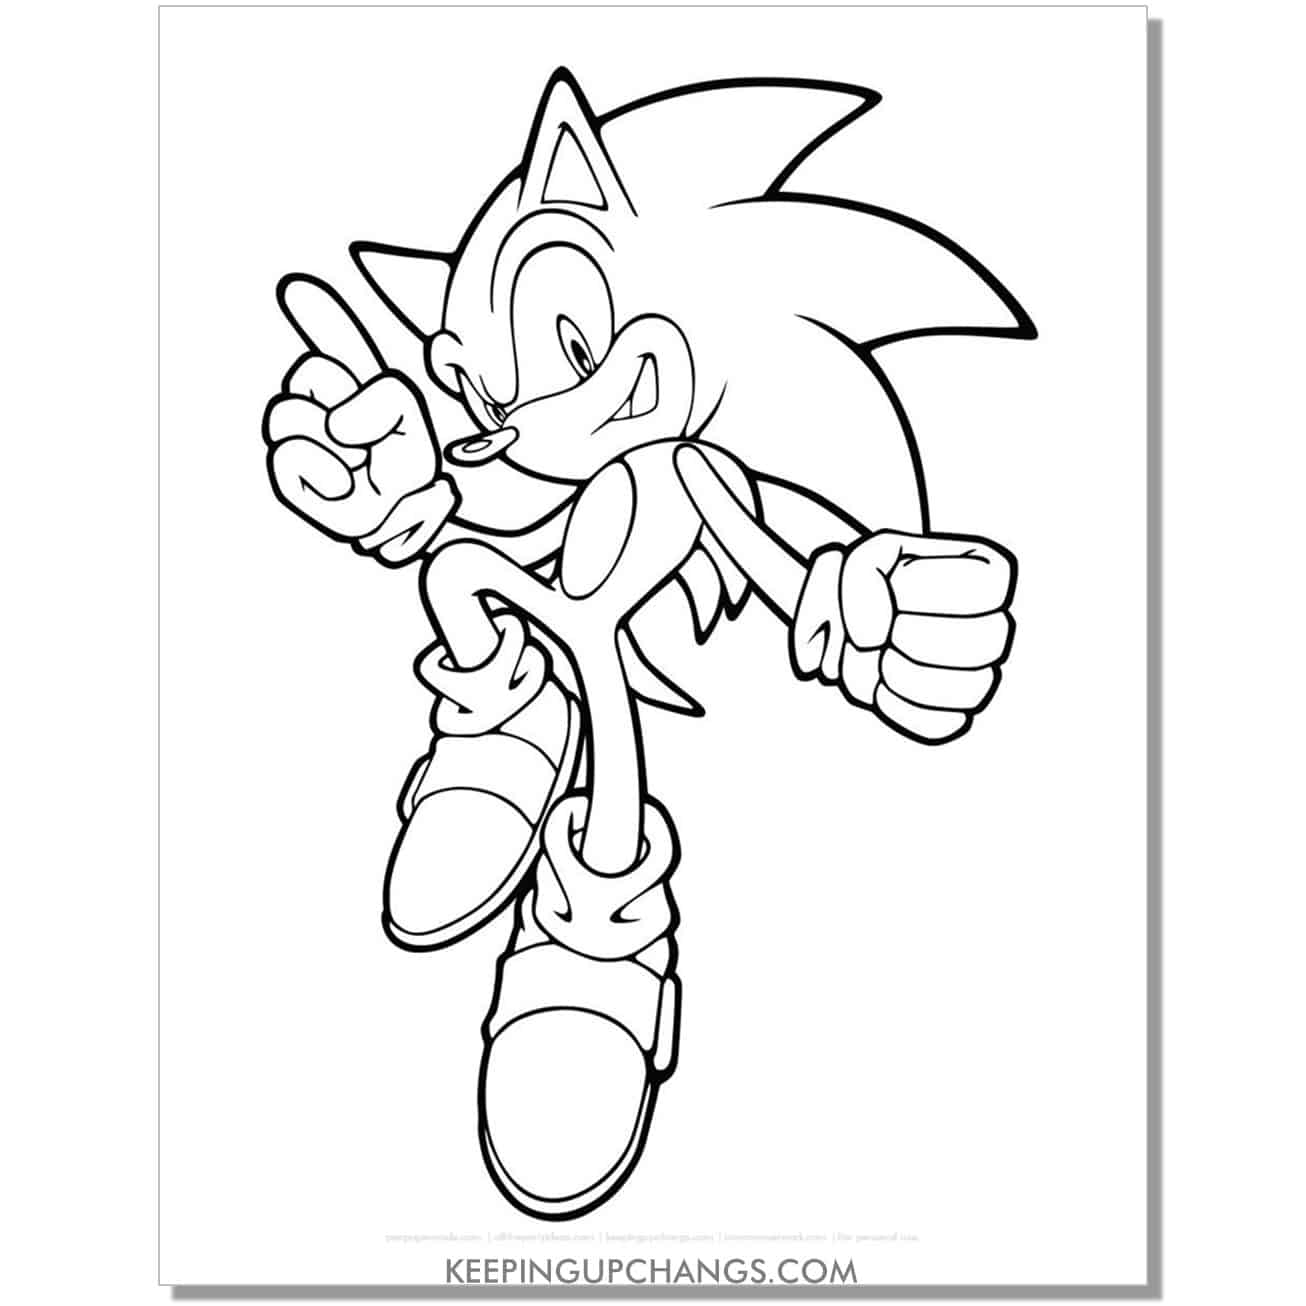 sonic with leg up and one arm up coloring page.